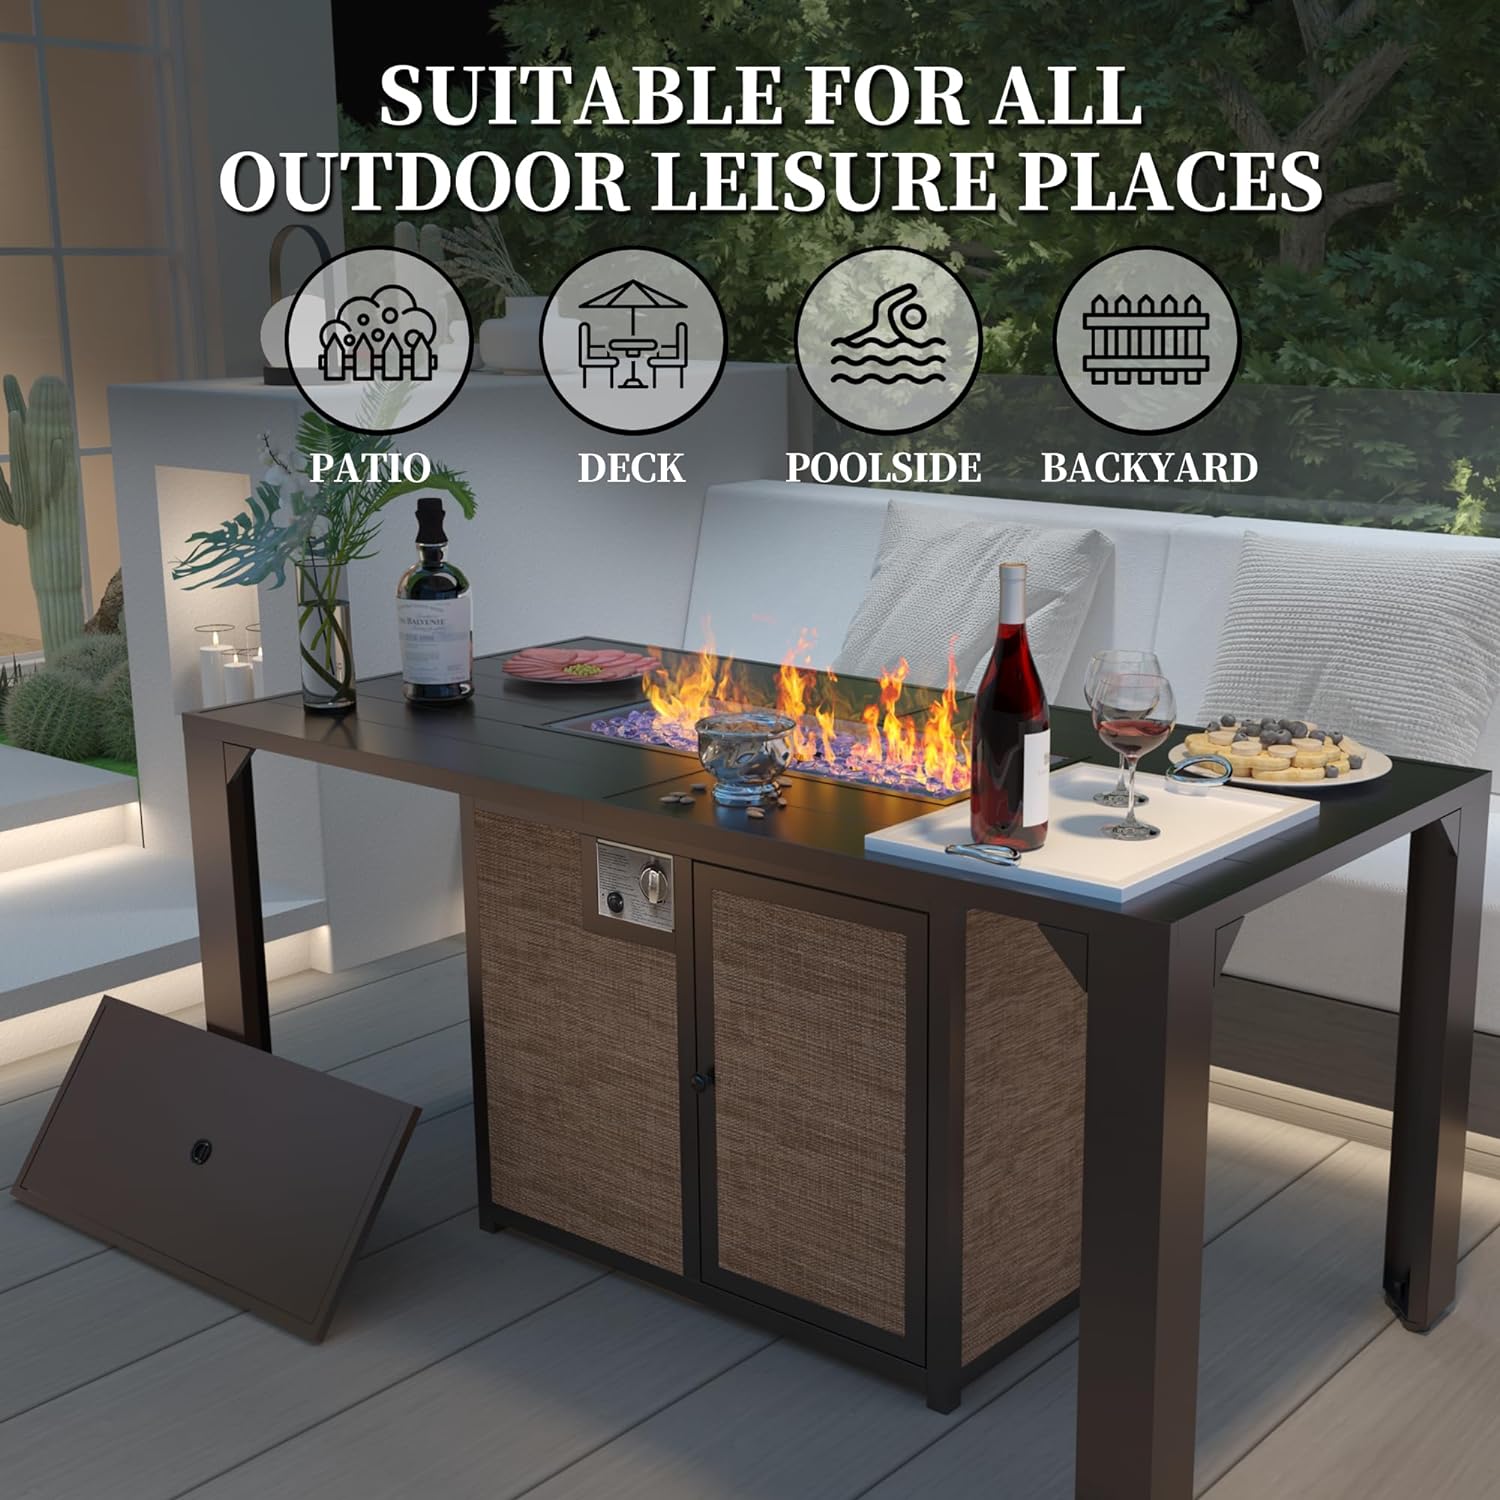 Pizzello Outdoor Fire Pit Dining Table Review